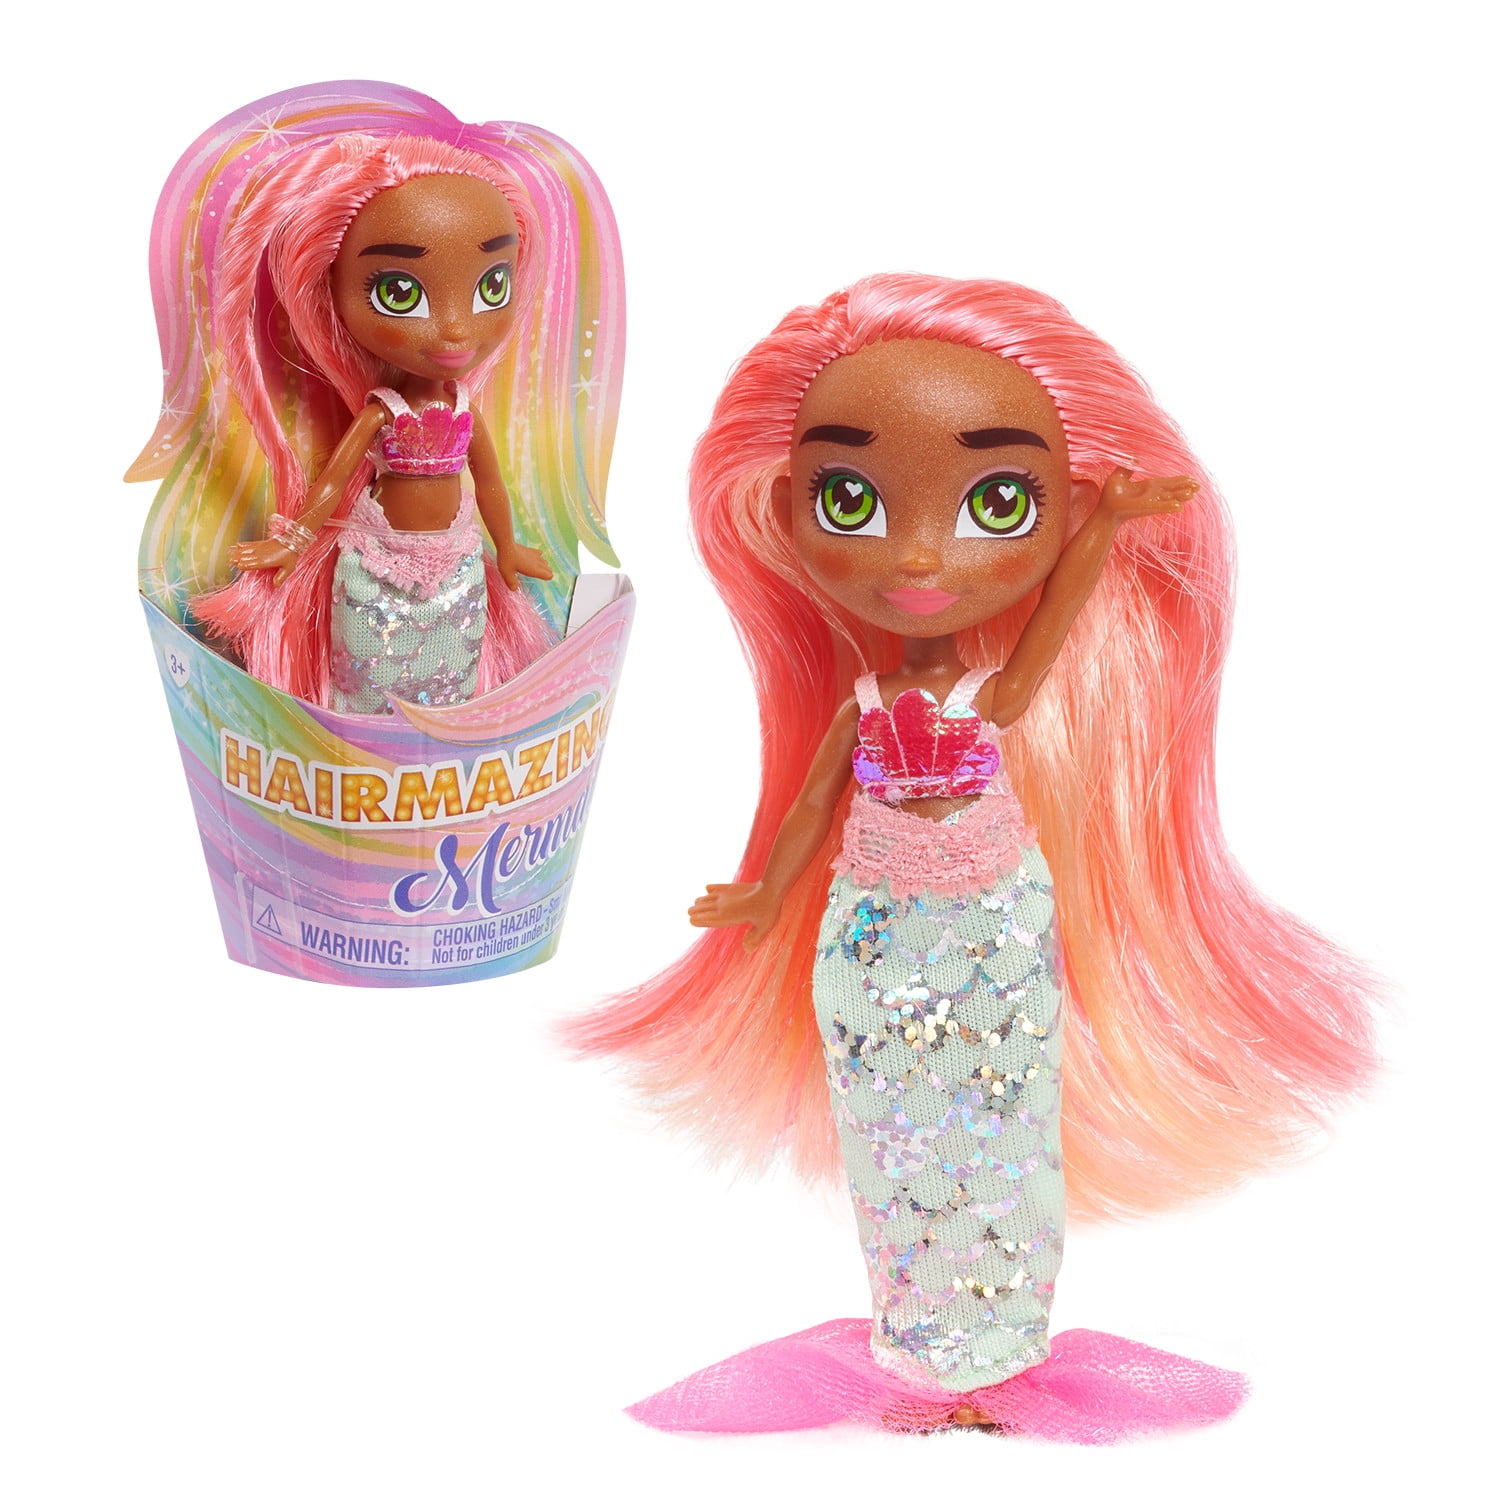 Hairmazing Collectible Small Dolls, Styles May Vary,  Kids Toys for Ages 3 Up, Stocking Stuffers and Small Gifts